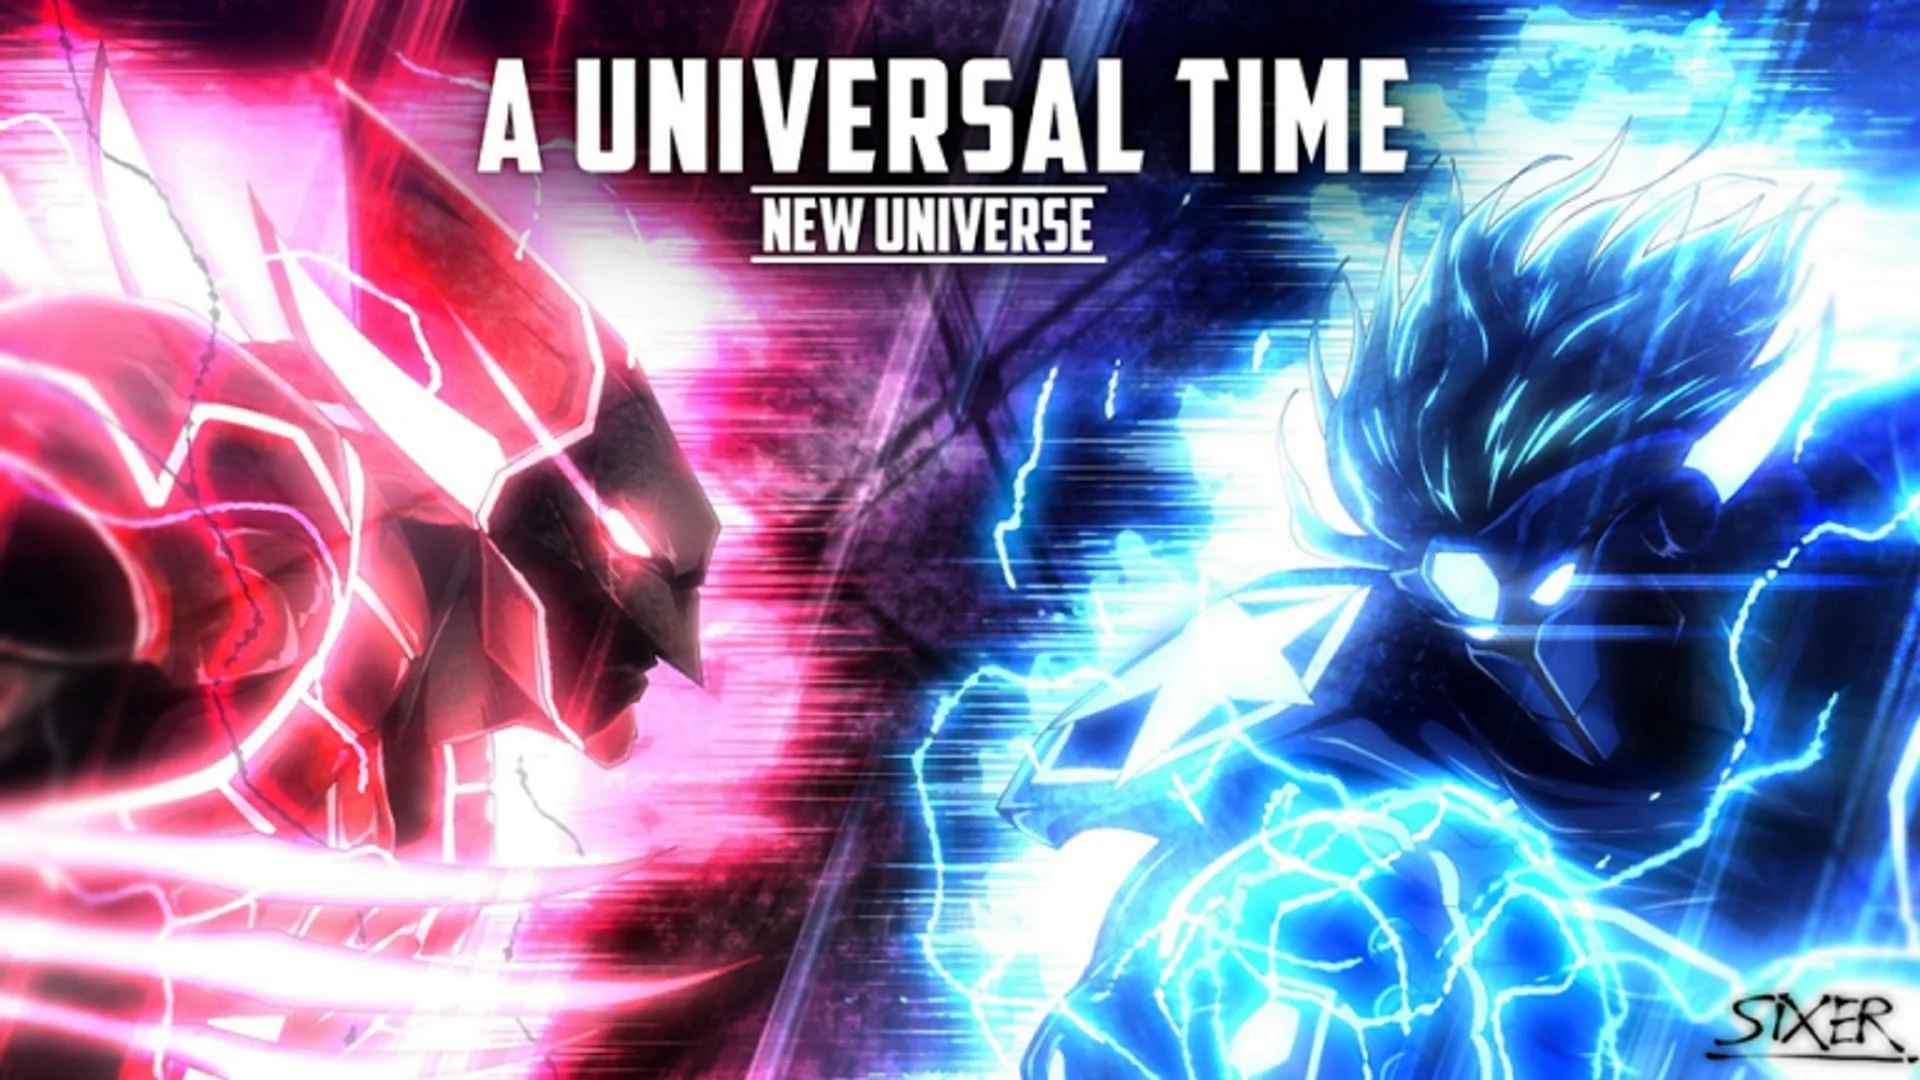 A Universal time